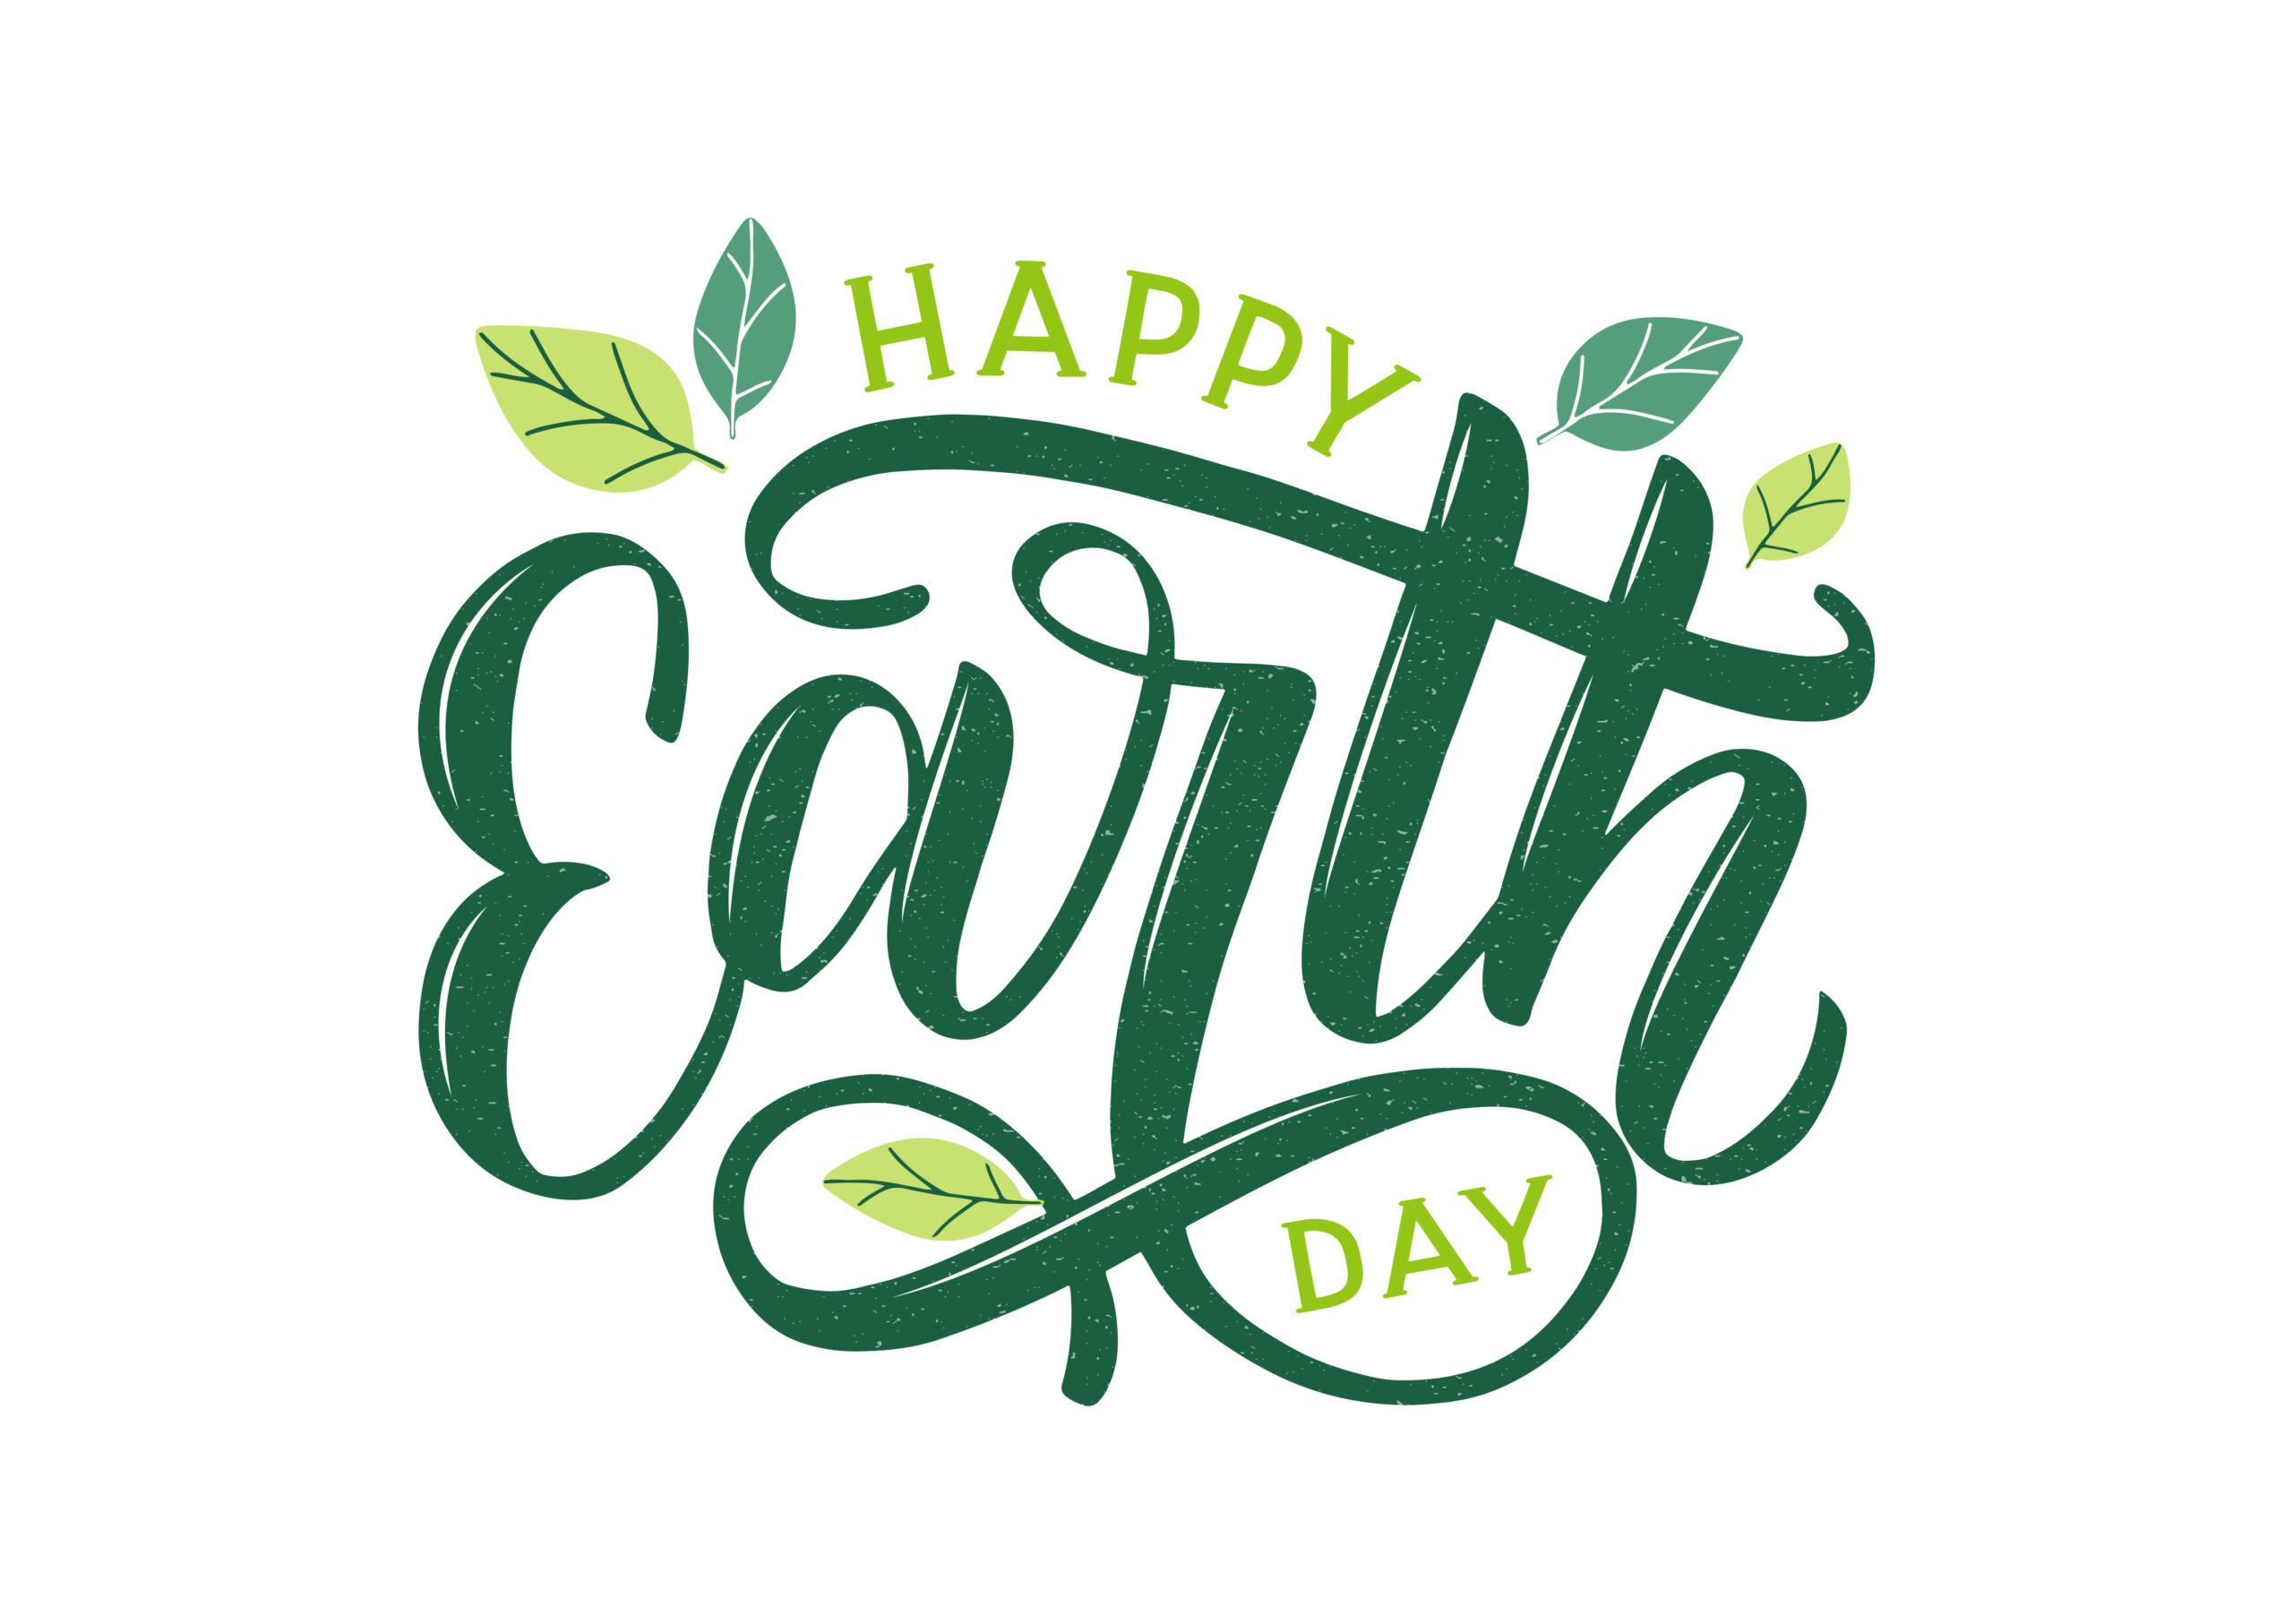 Happy Earth Day hand lettering logo decorated by leaves.